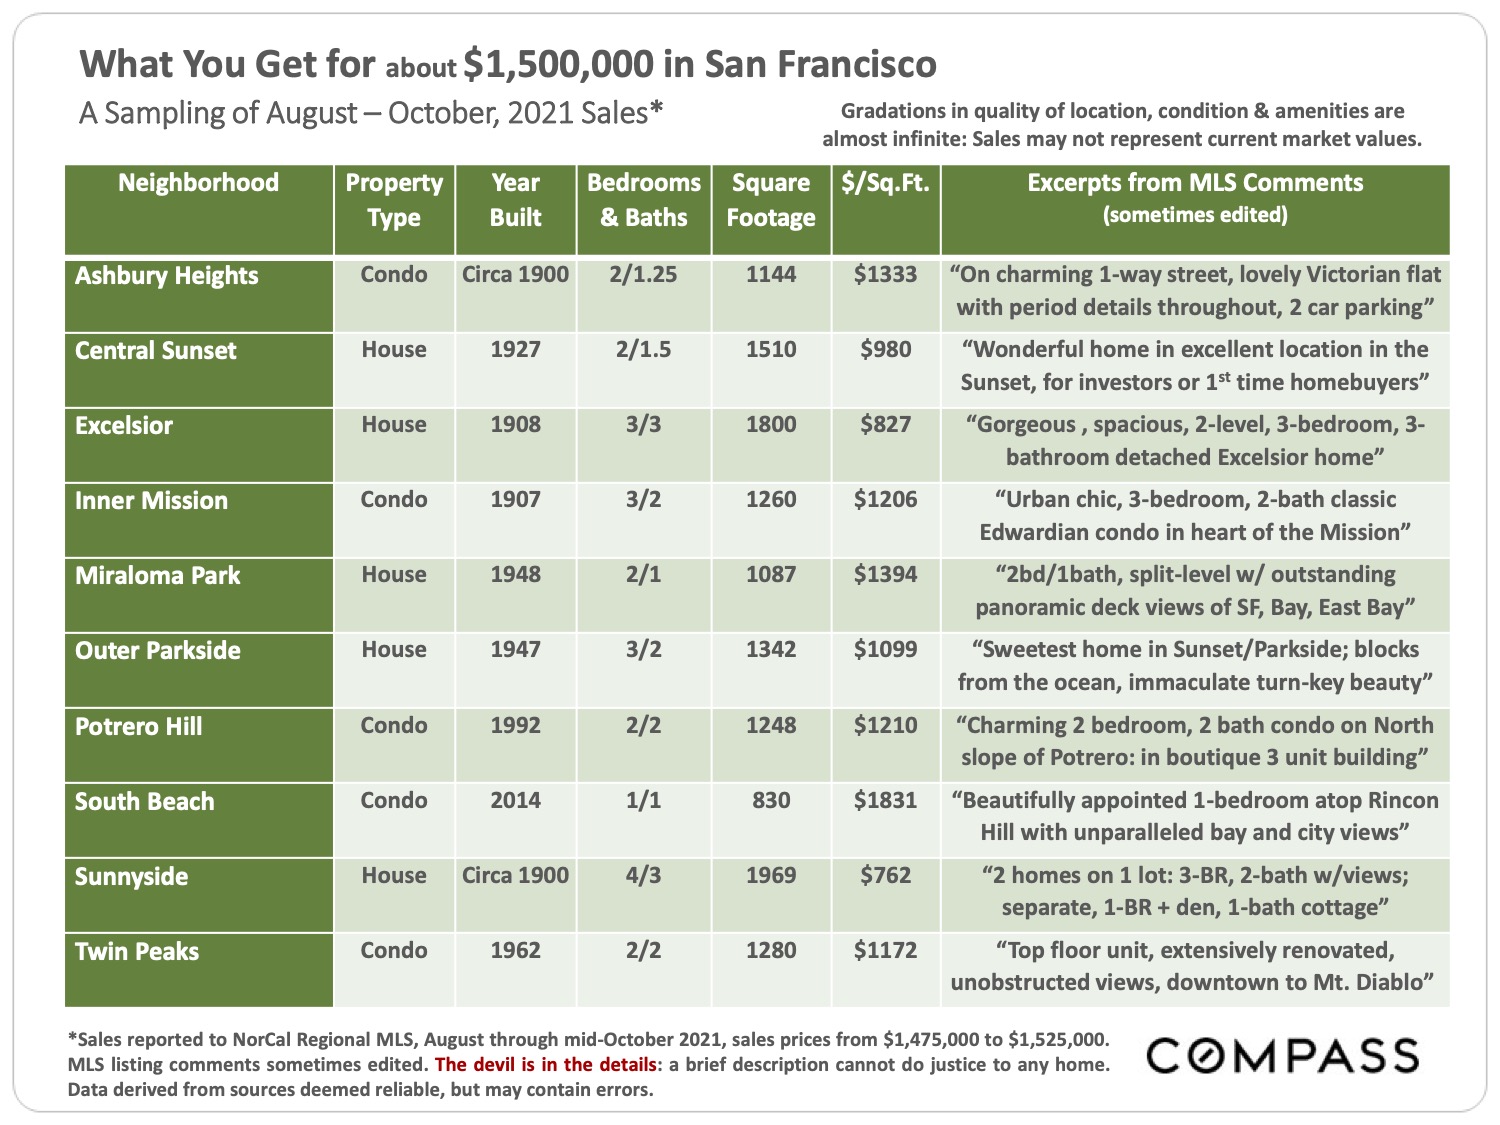 What You Get for about $1500000 in San Francisco A Sampling of August to October 2021 Sales page 5 of San Francisco real estate Market Report November 2021